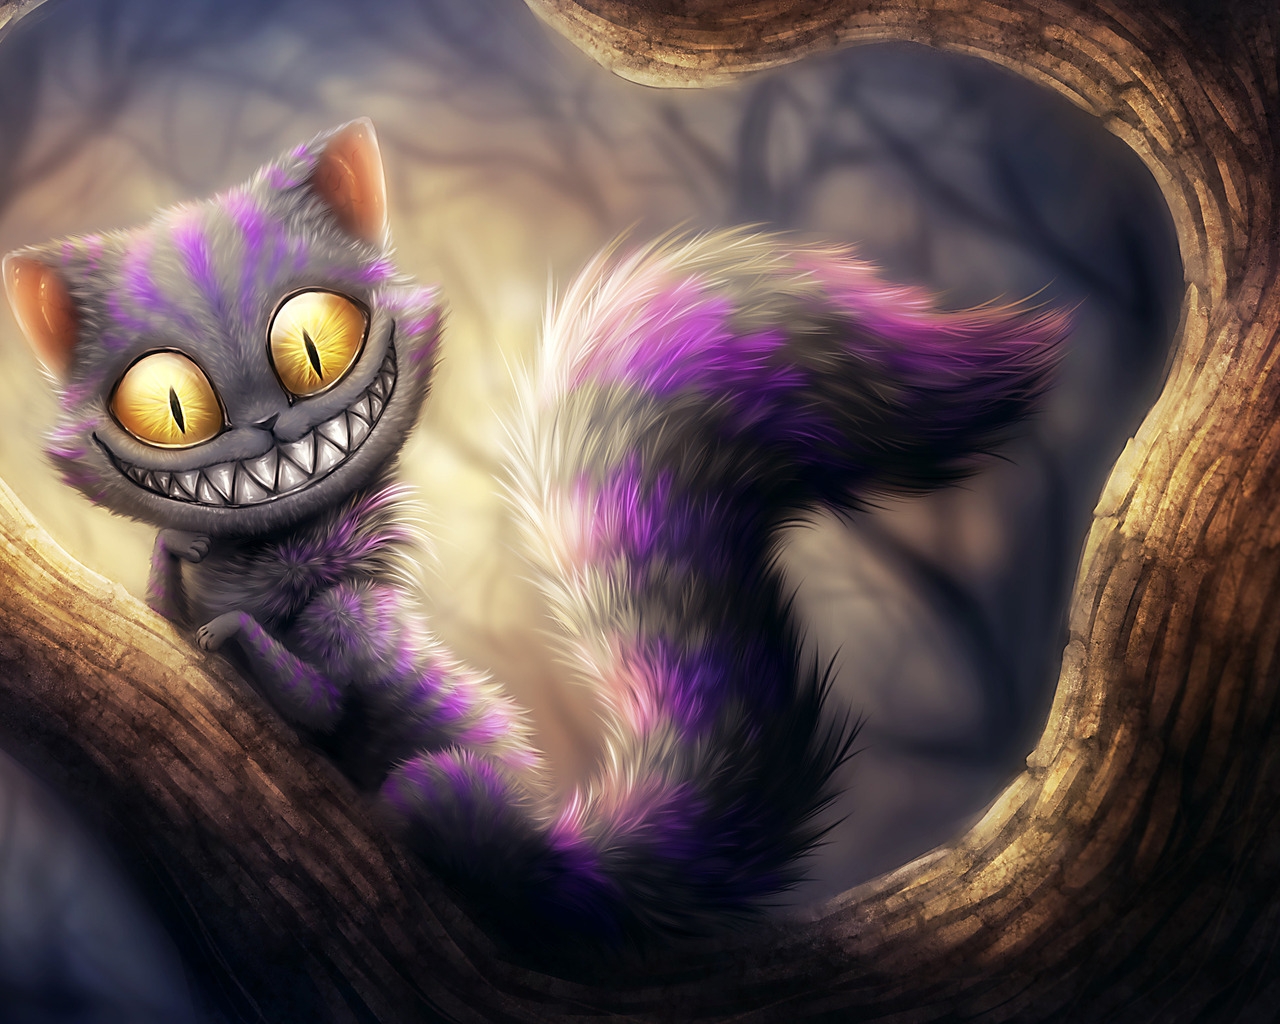 Cheshire Cat from Alice Adventures in Wonderland for 1280 x 1024 resolution